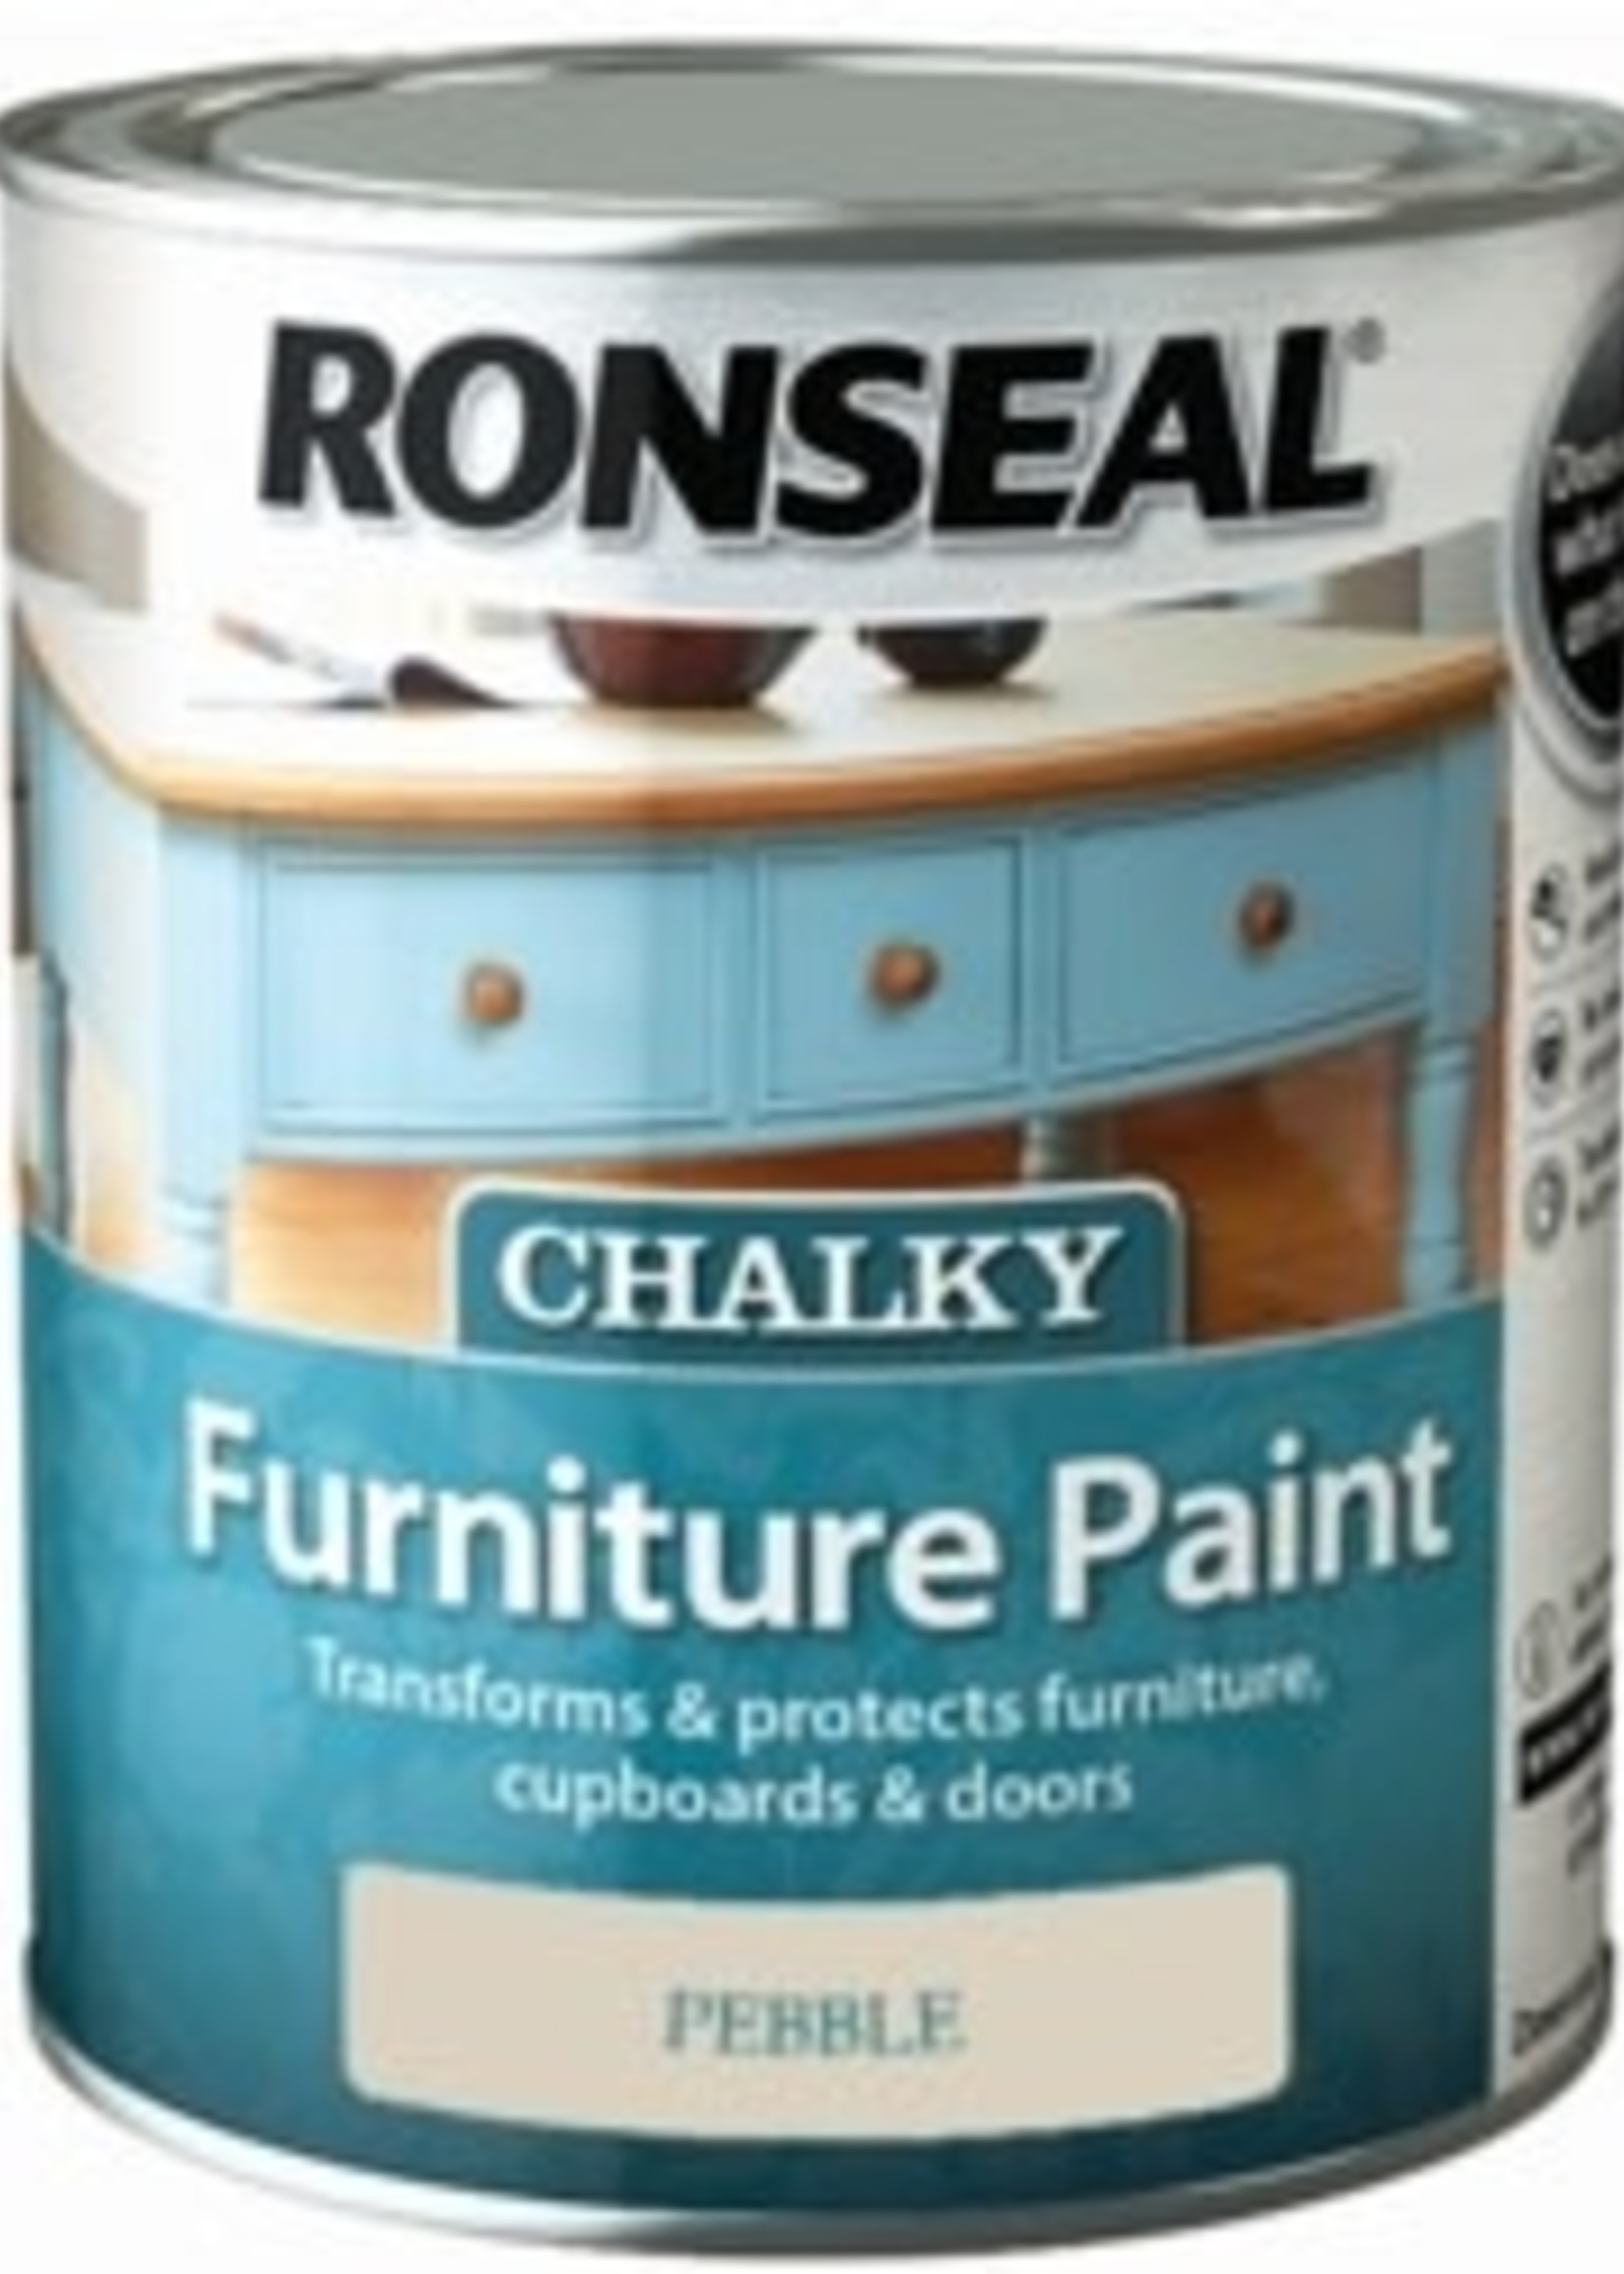 Ronseal Ronseal Chalky Furniture Paint 750ml